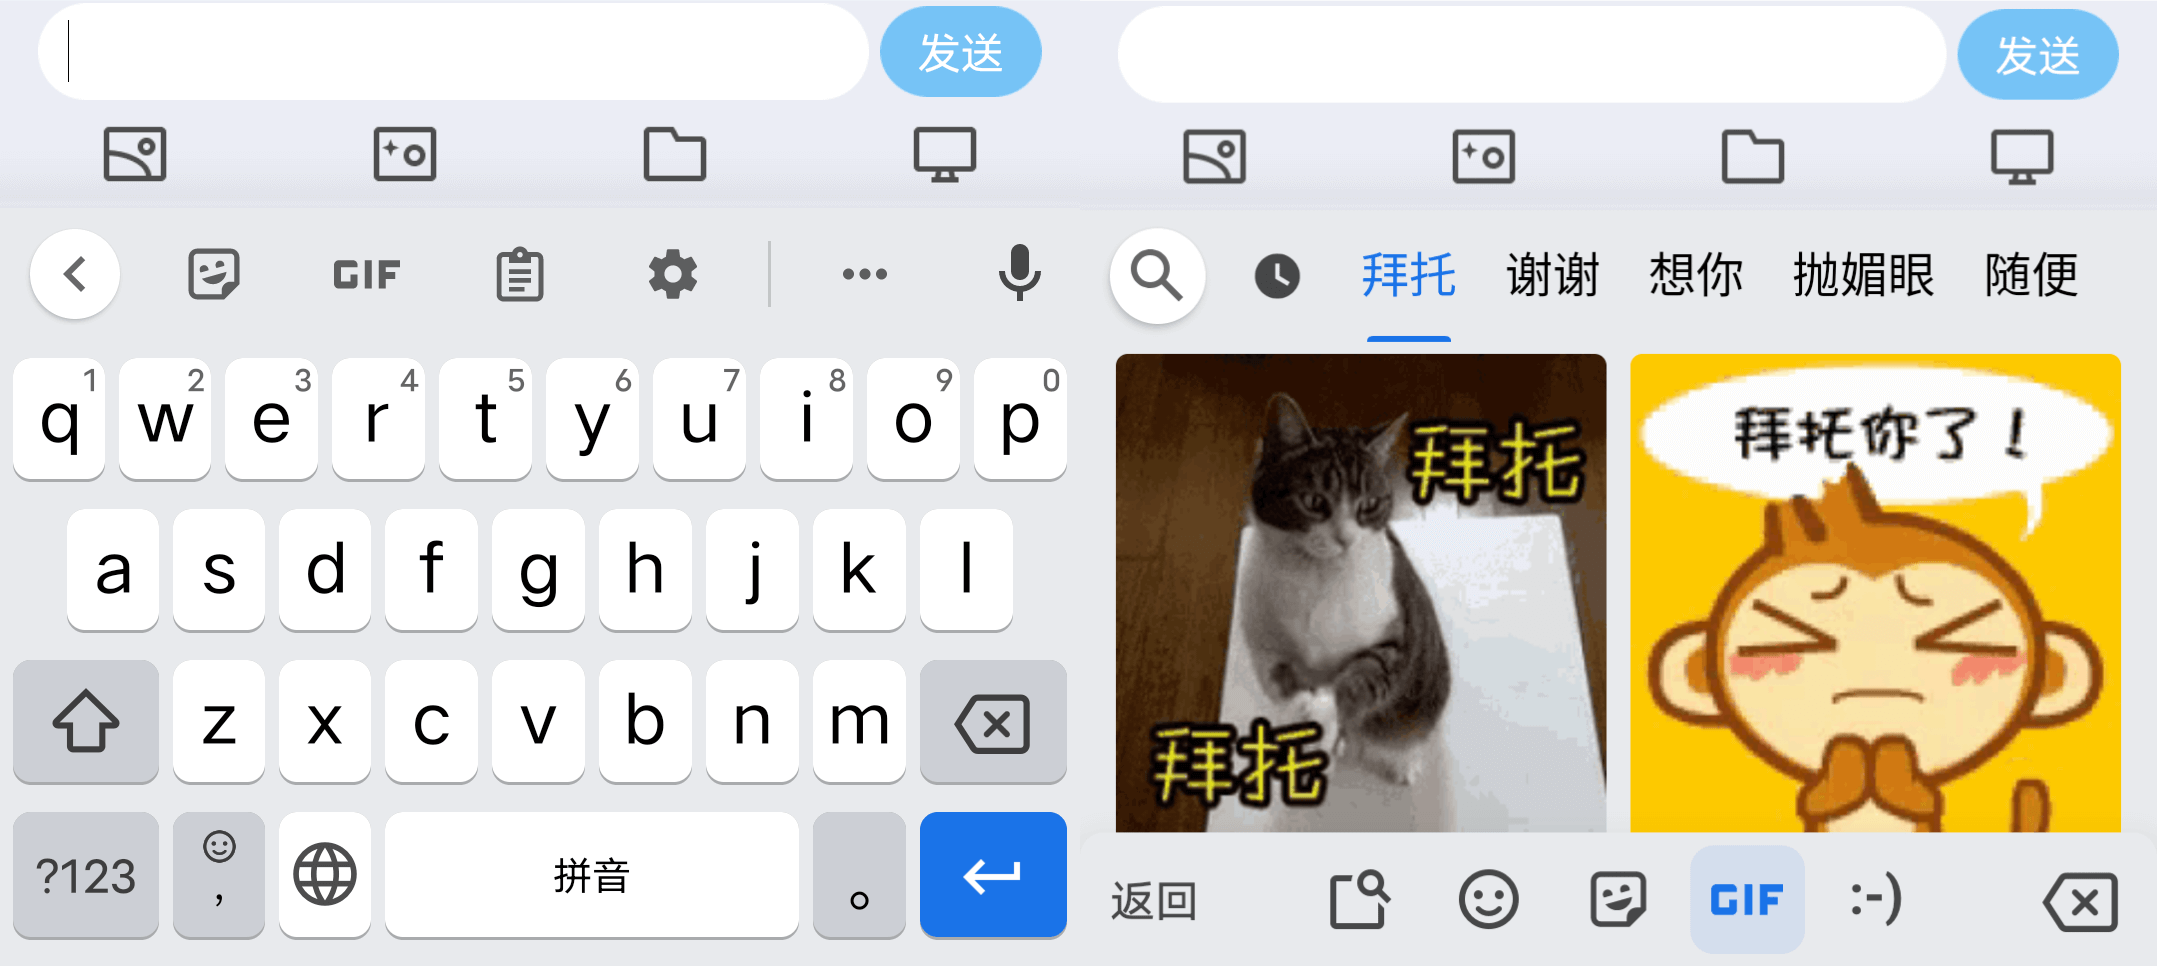 Android Gboard Google输入法_v11.3.02